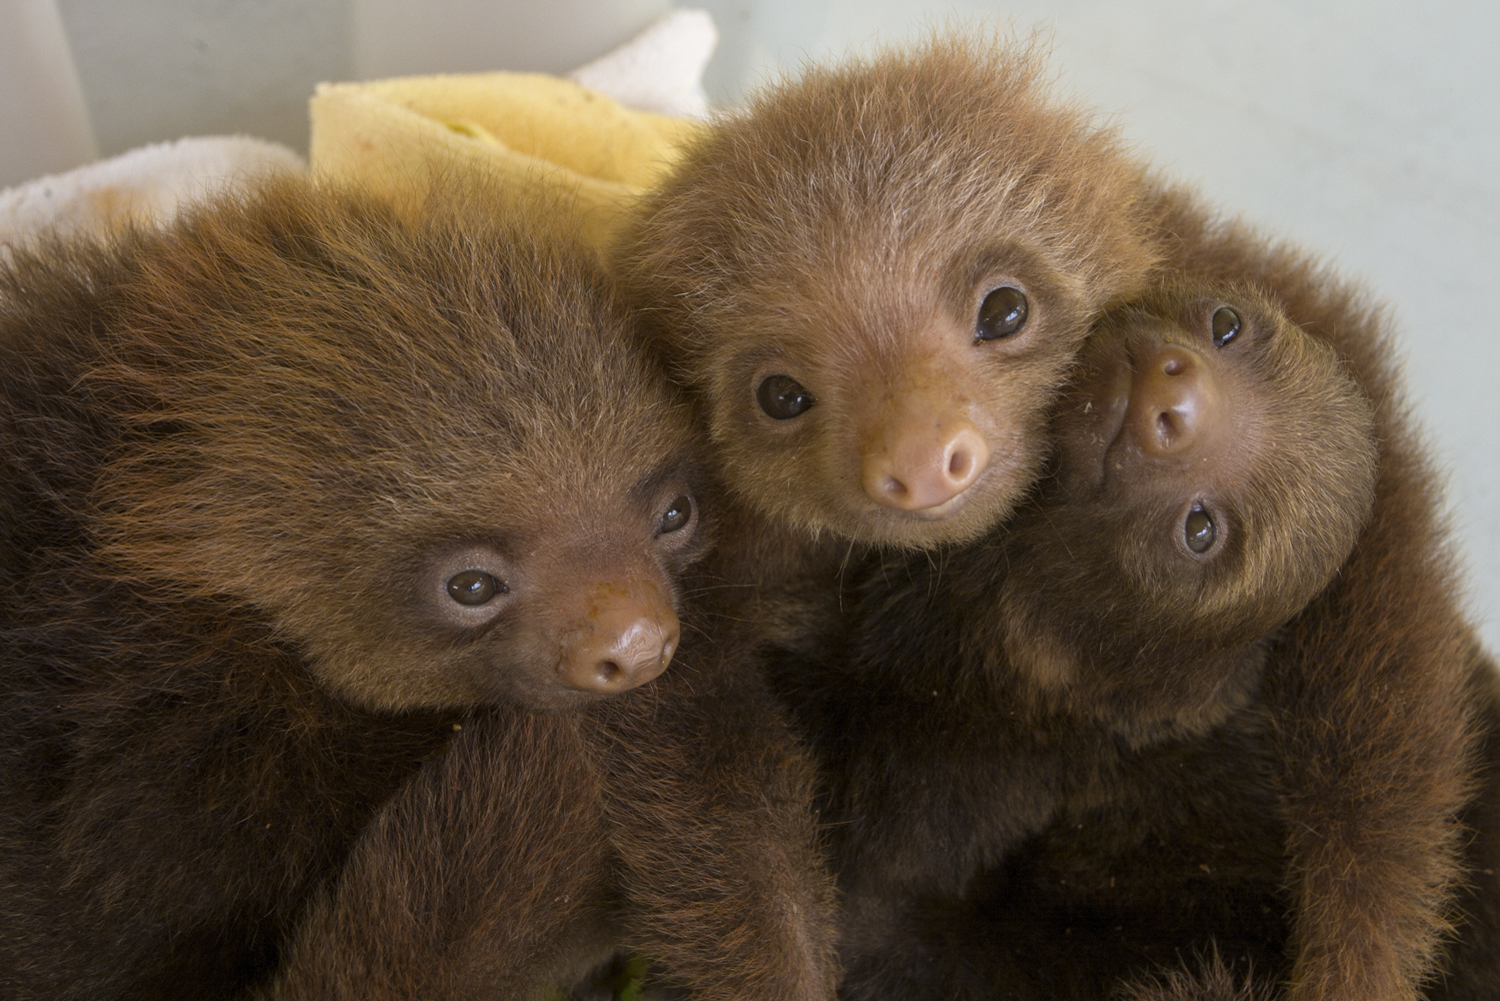 What do you call a group of sloths?